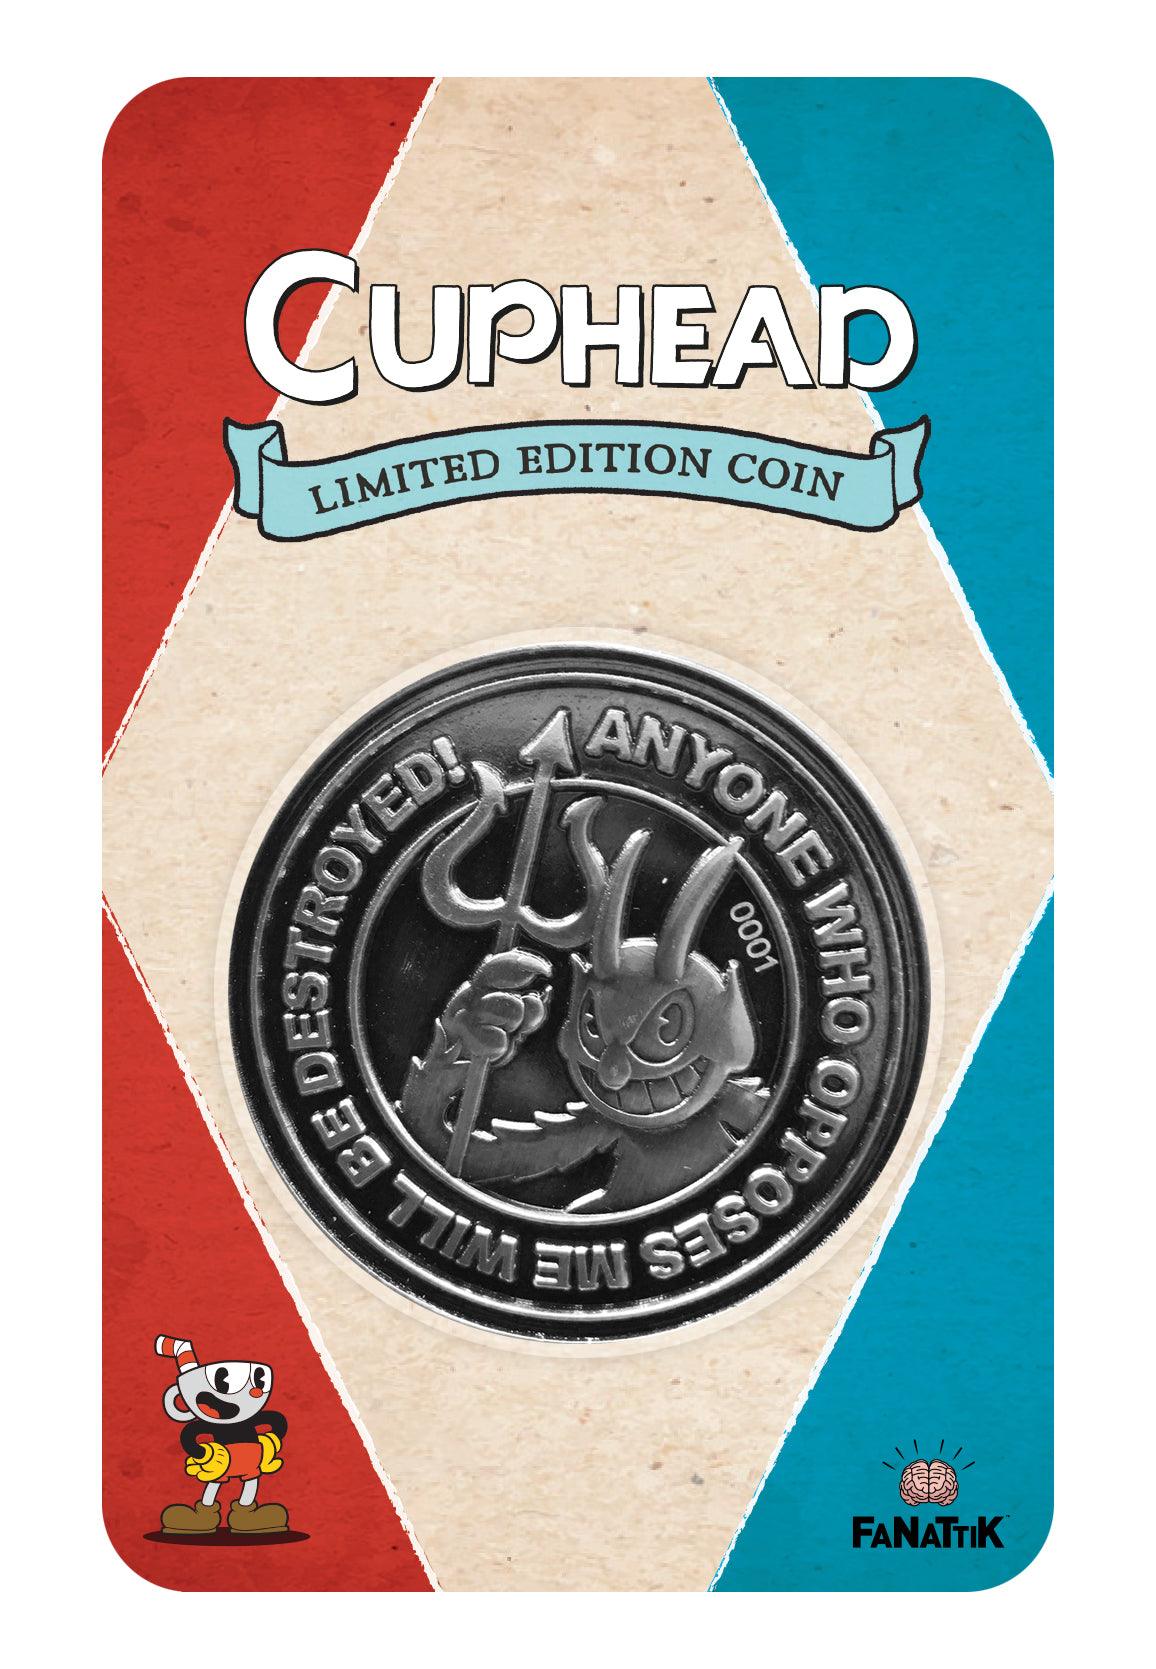 Coin Cuphead - Want a New Gadget